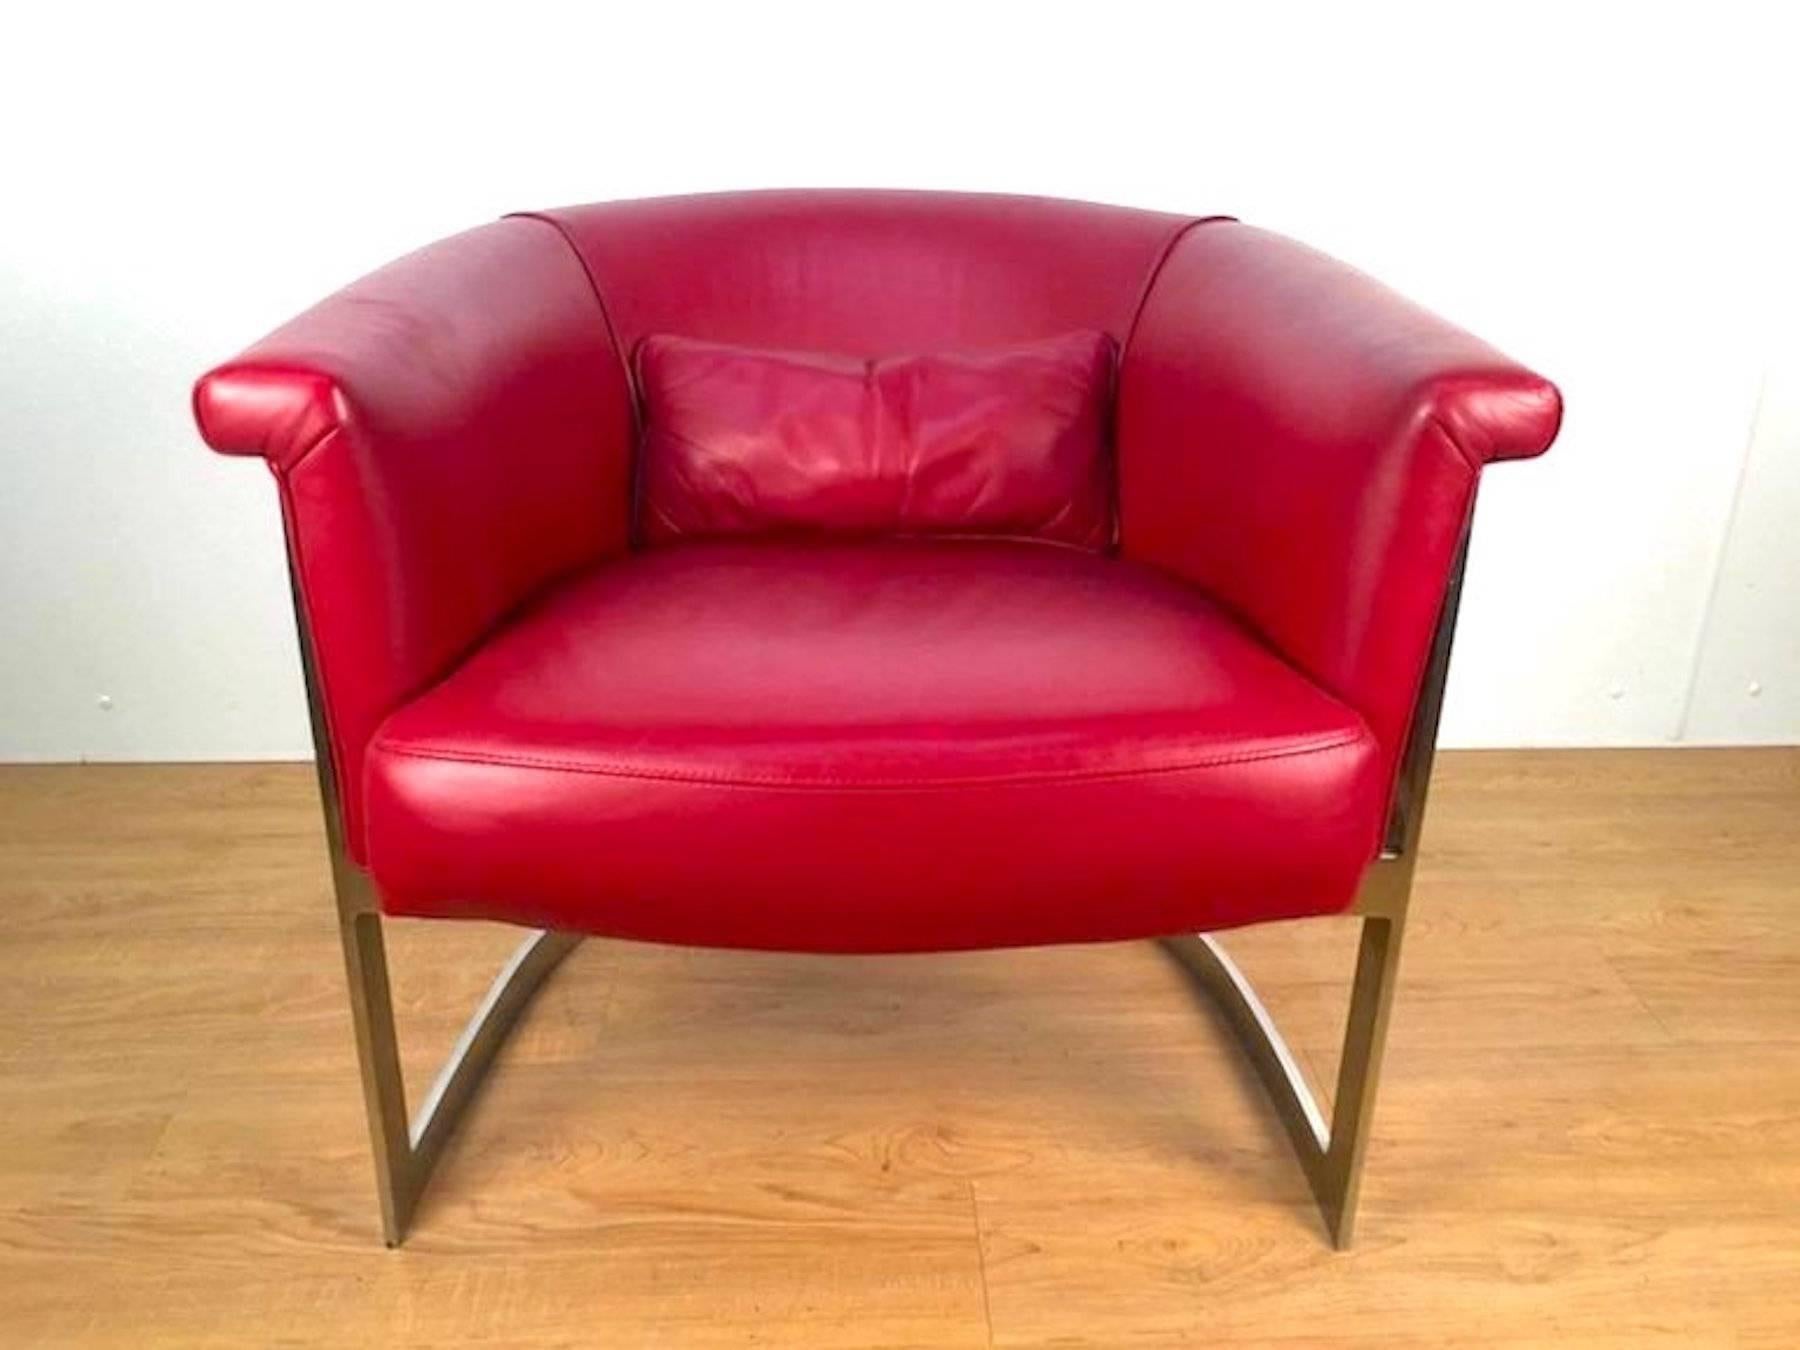 Polished John Stuart Style Rounded Lounge Chair in Custom Red Leather For Sale